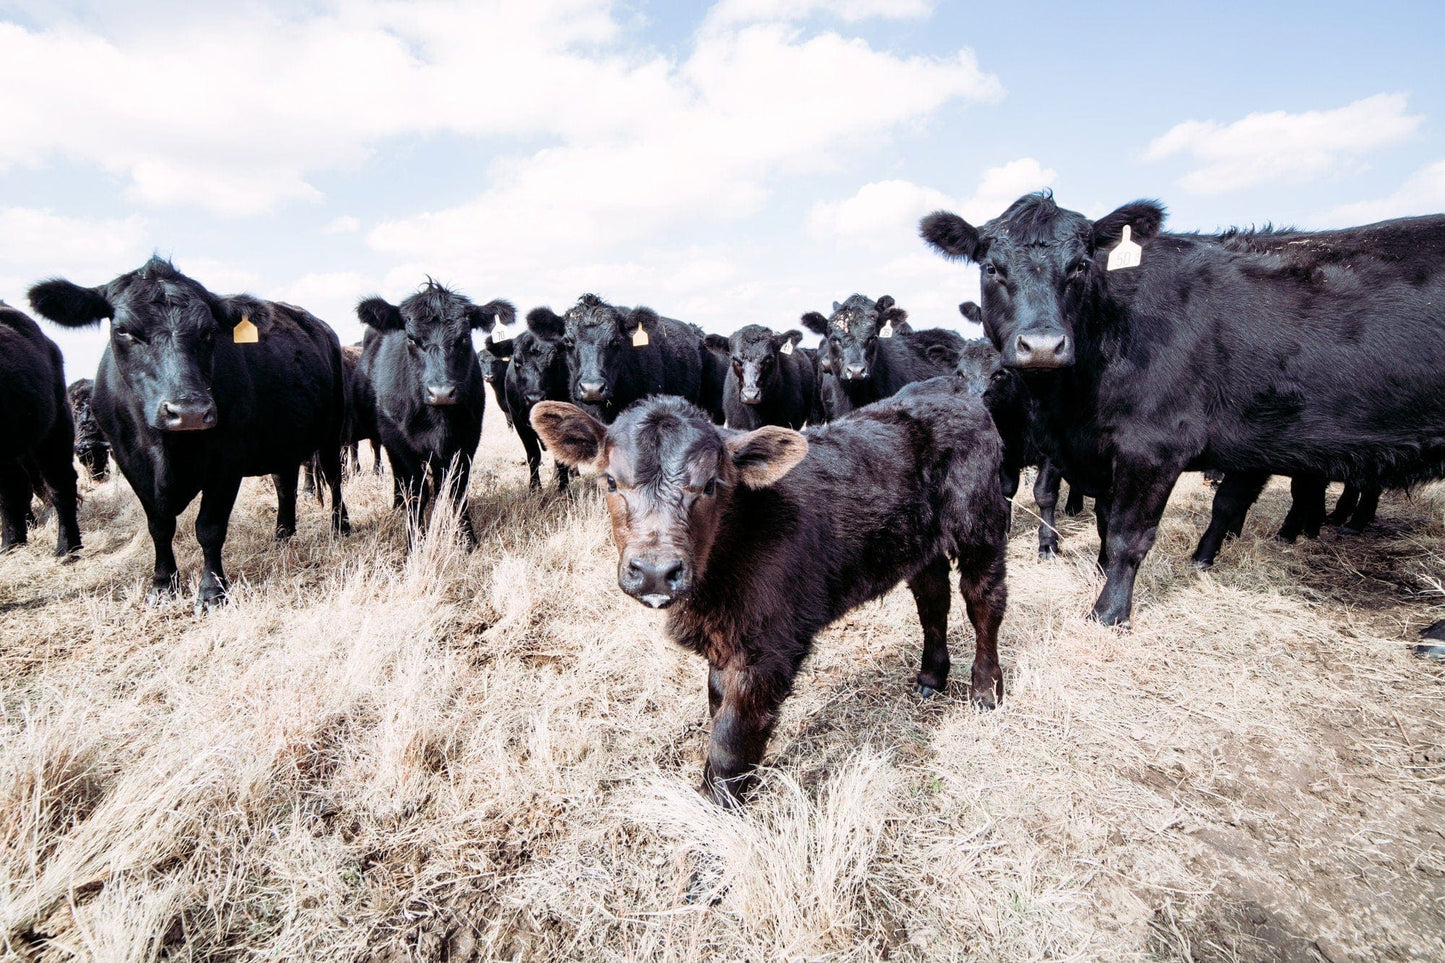 Ranch Style Black Angus Cattle - Angus Cows and Calf Paper Photo Print / 12 x 18 Inches Wall Art Teri James Photography